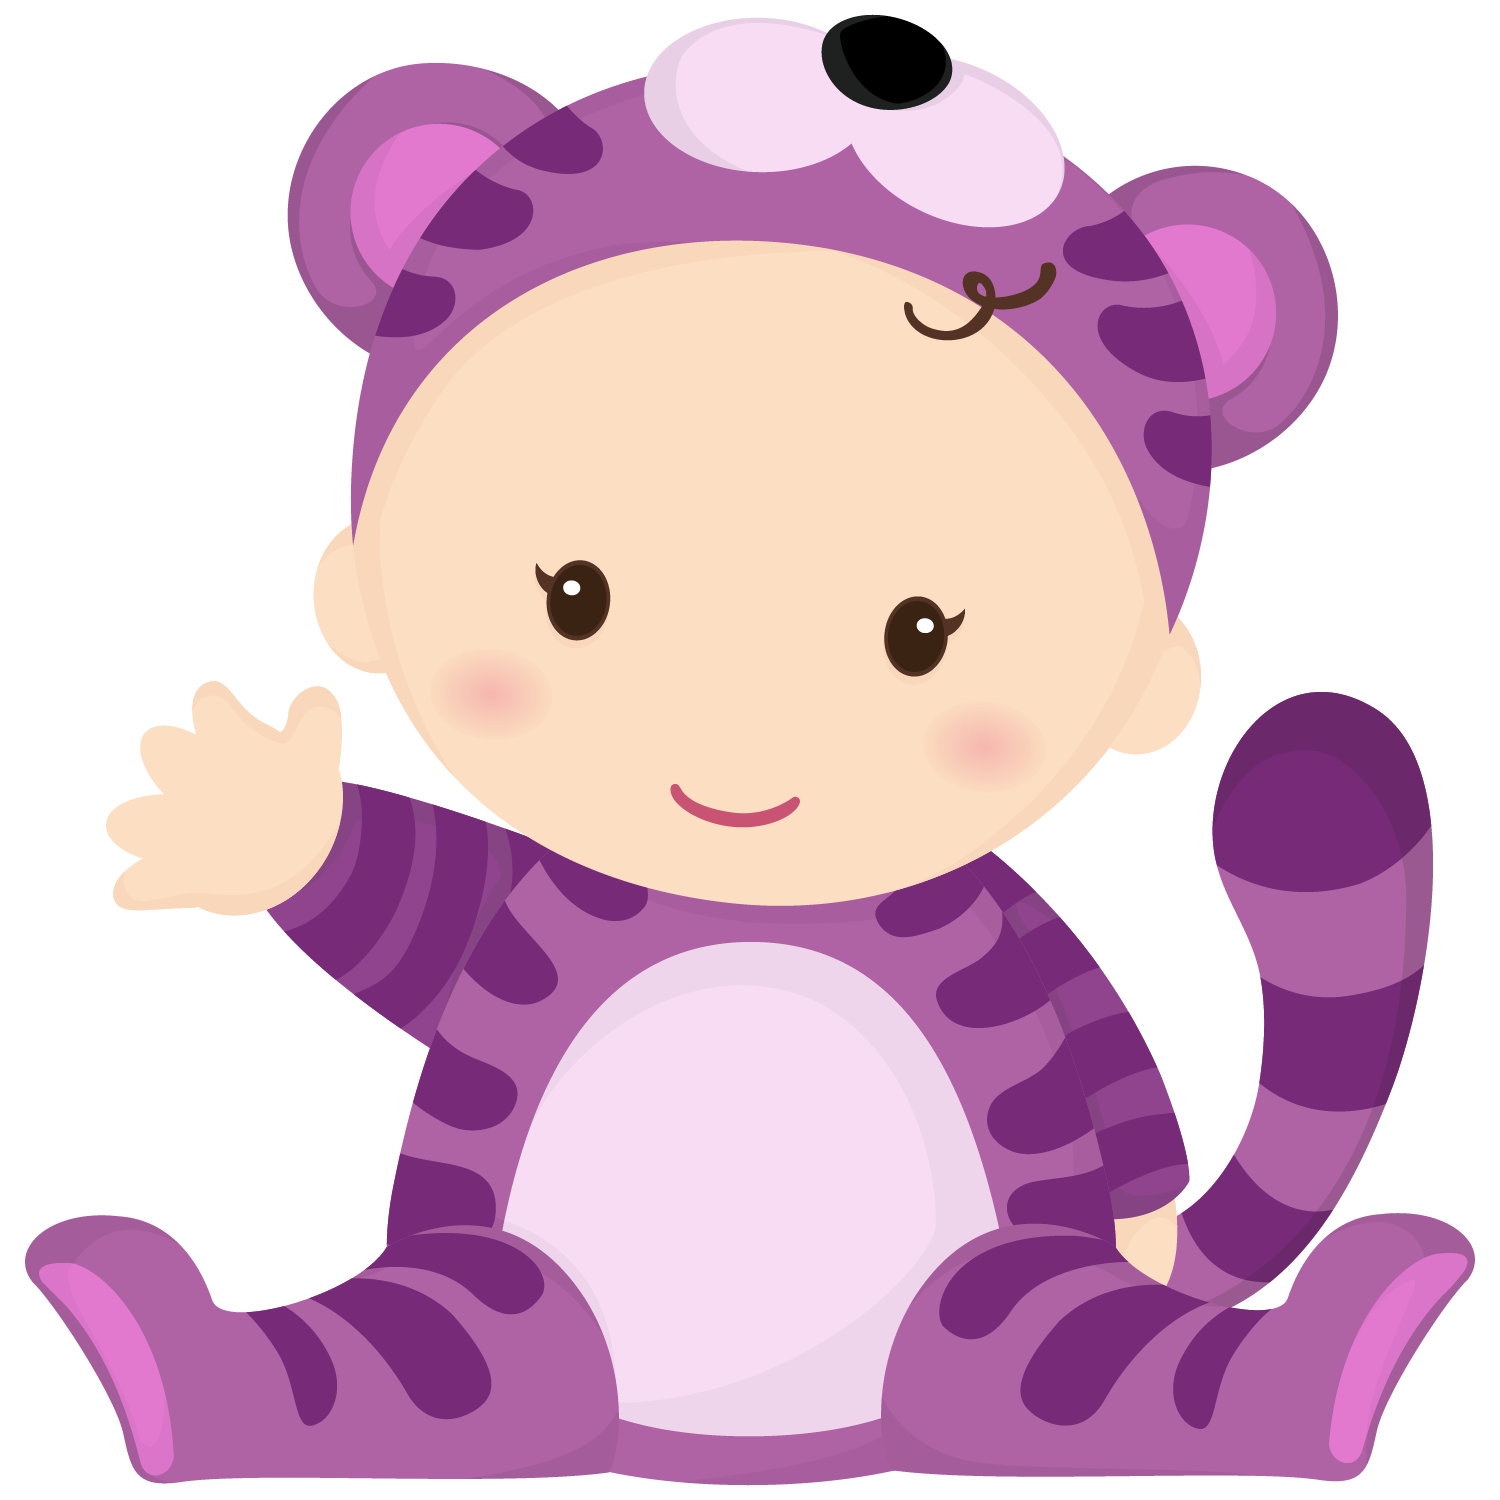 infant clipart fraternal twin